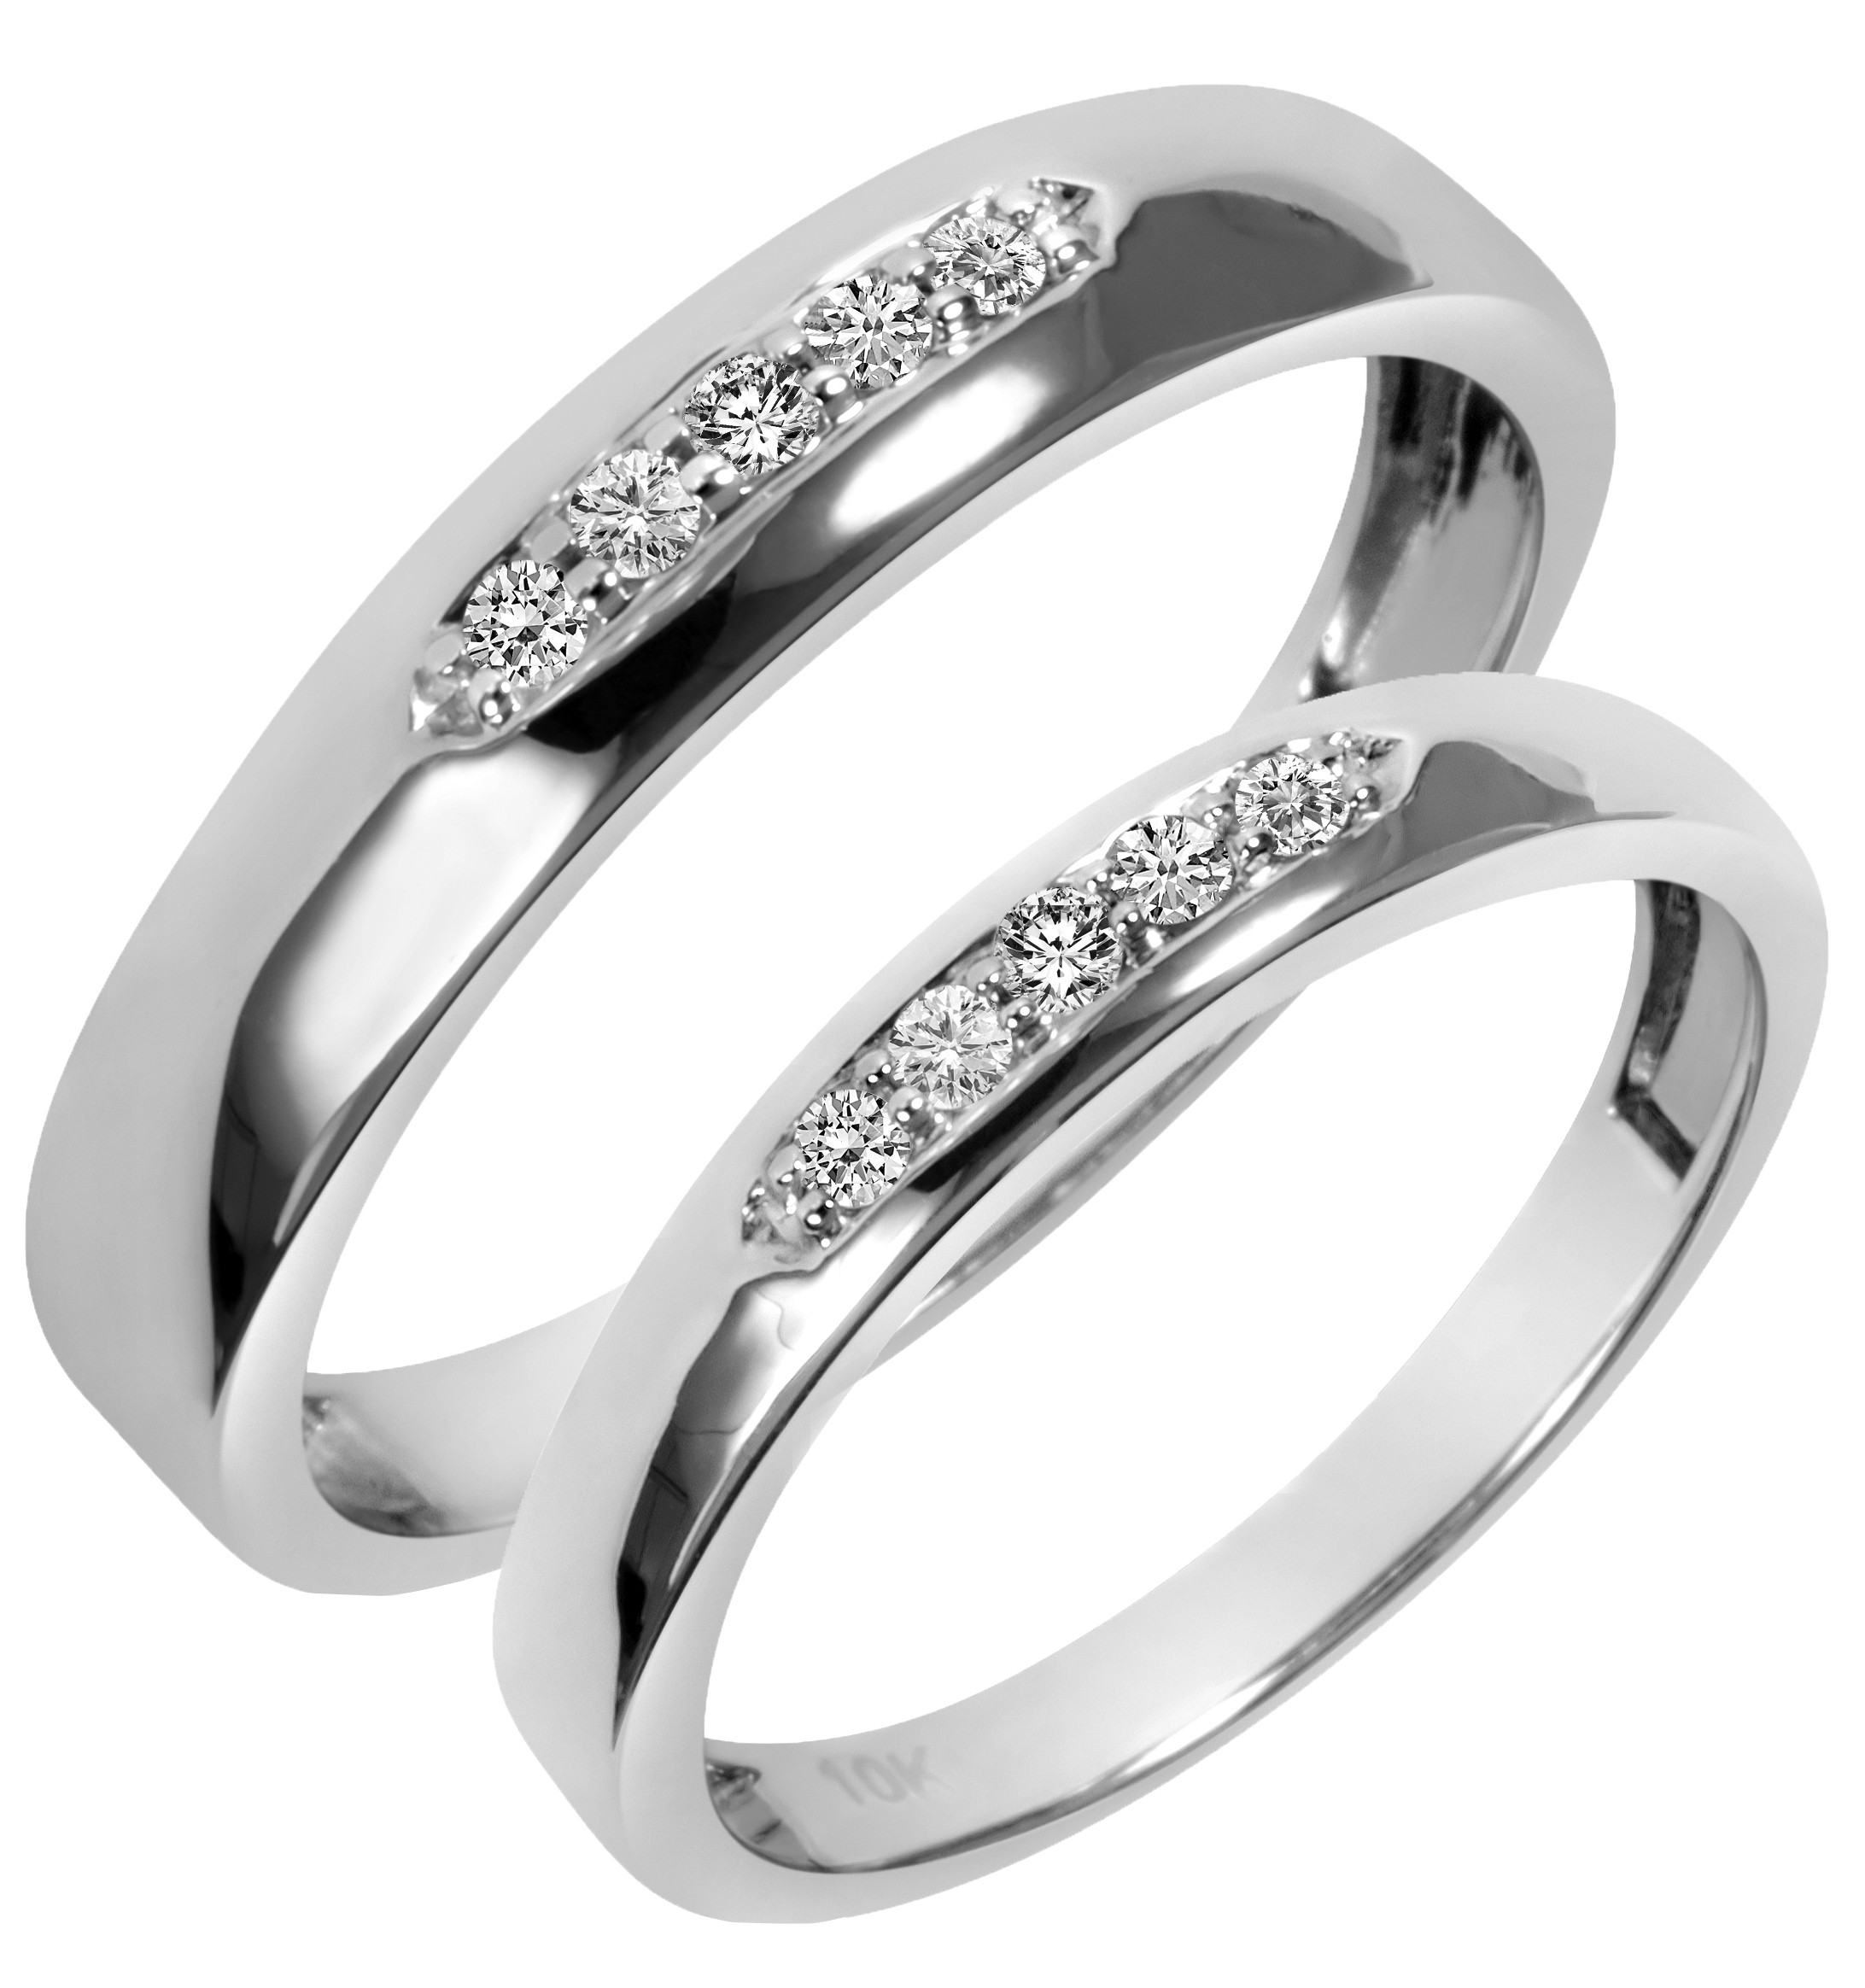 Wedding Band Sets His And Hers
 1 5 Carat T W Diamond His And Hers Wedding Band Set 10K